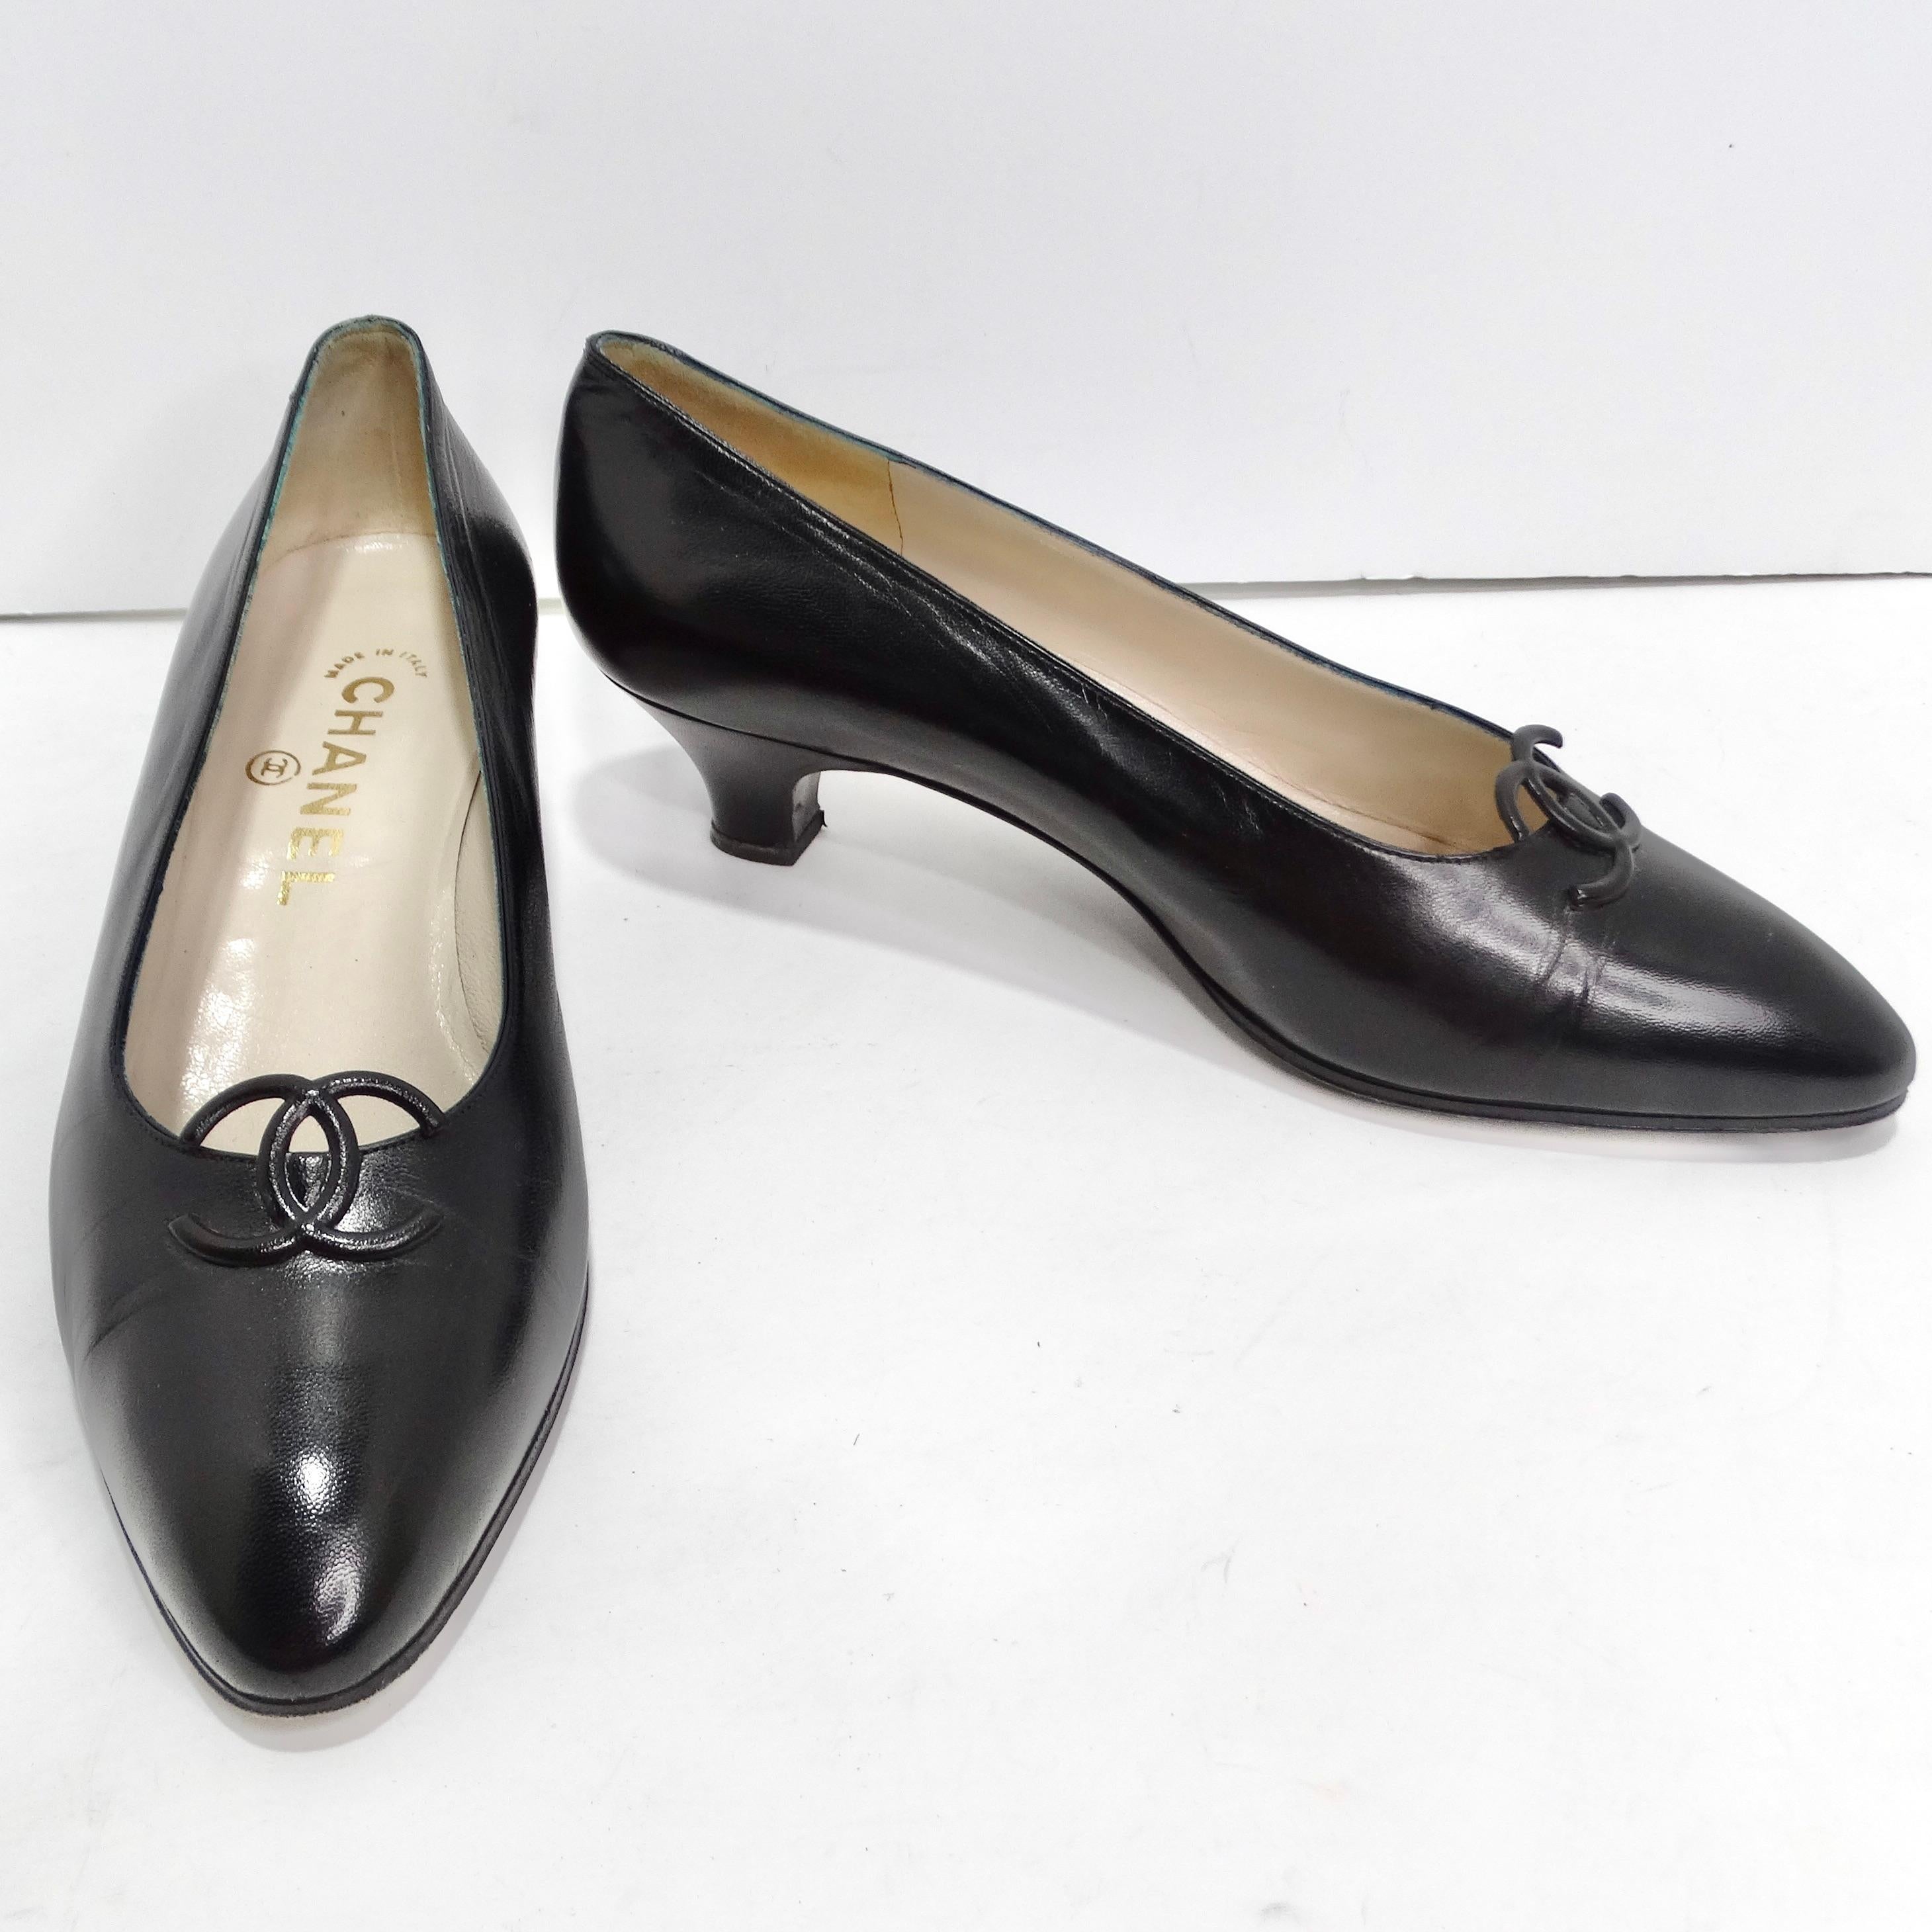 Chanel 1980s CC Black Leather Kitten Heels In Excellent Condition For Sale In Scottsdale, AZ